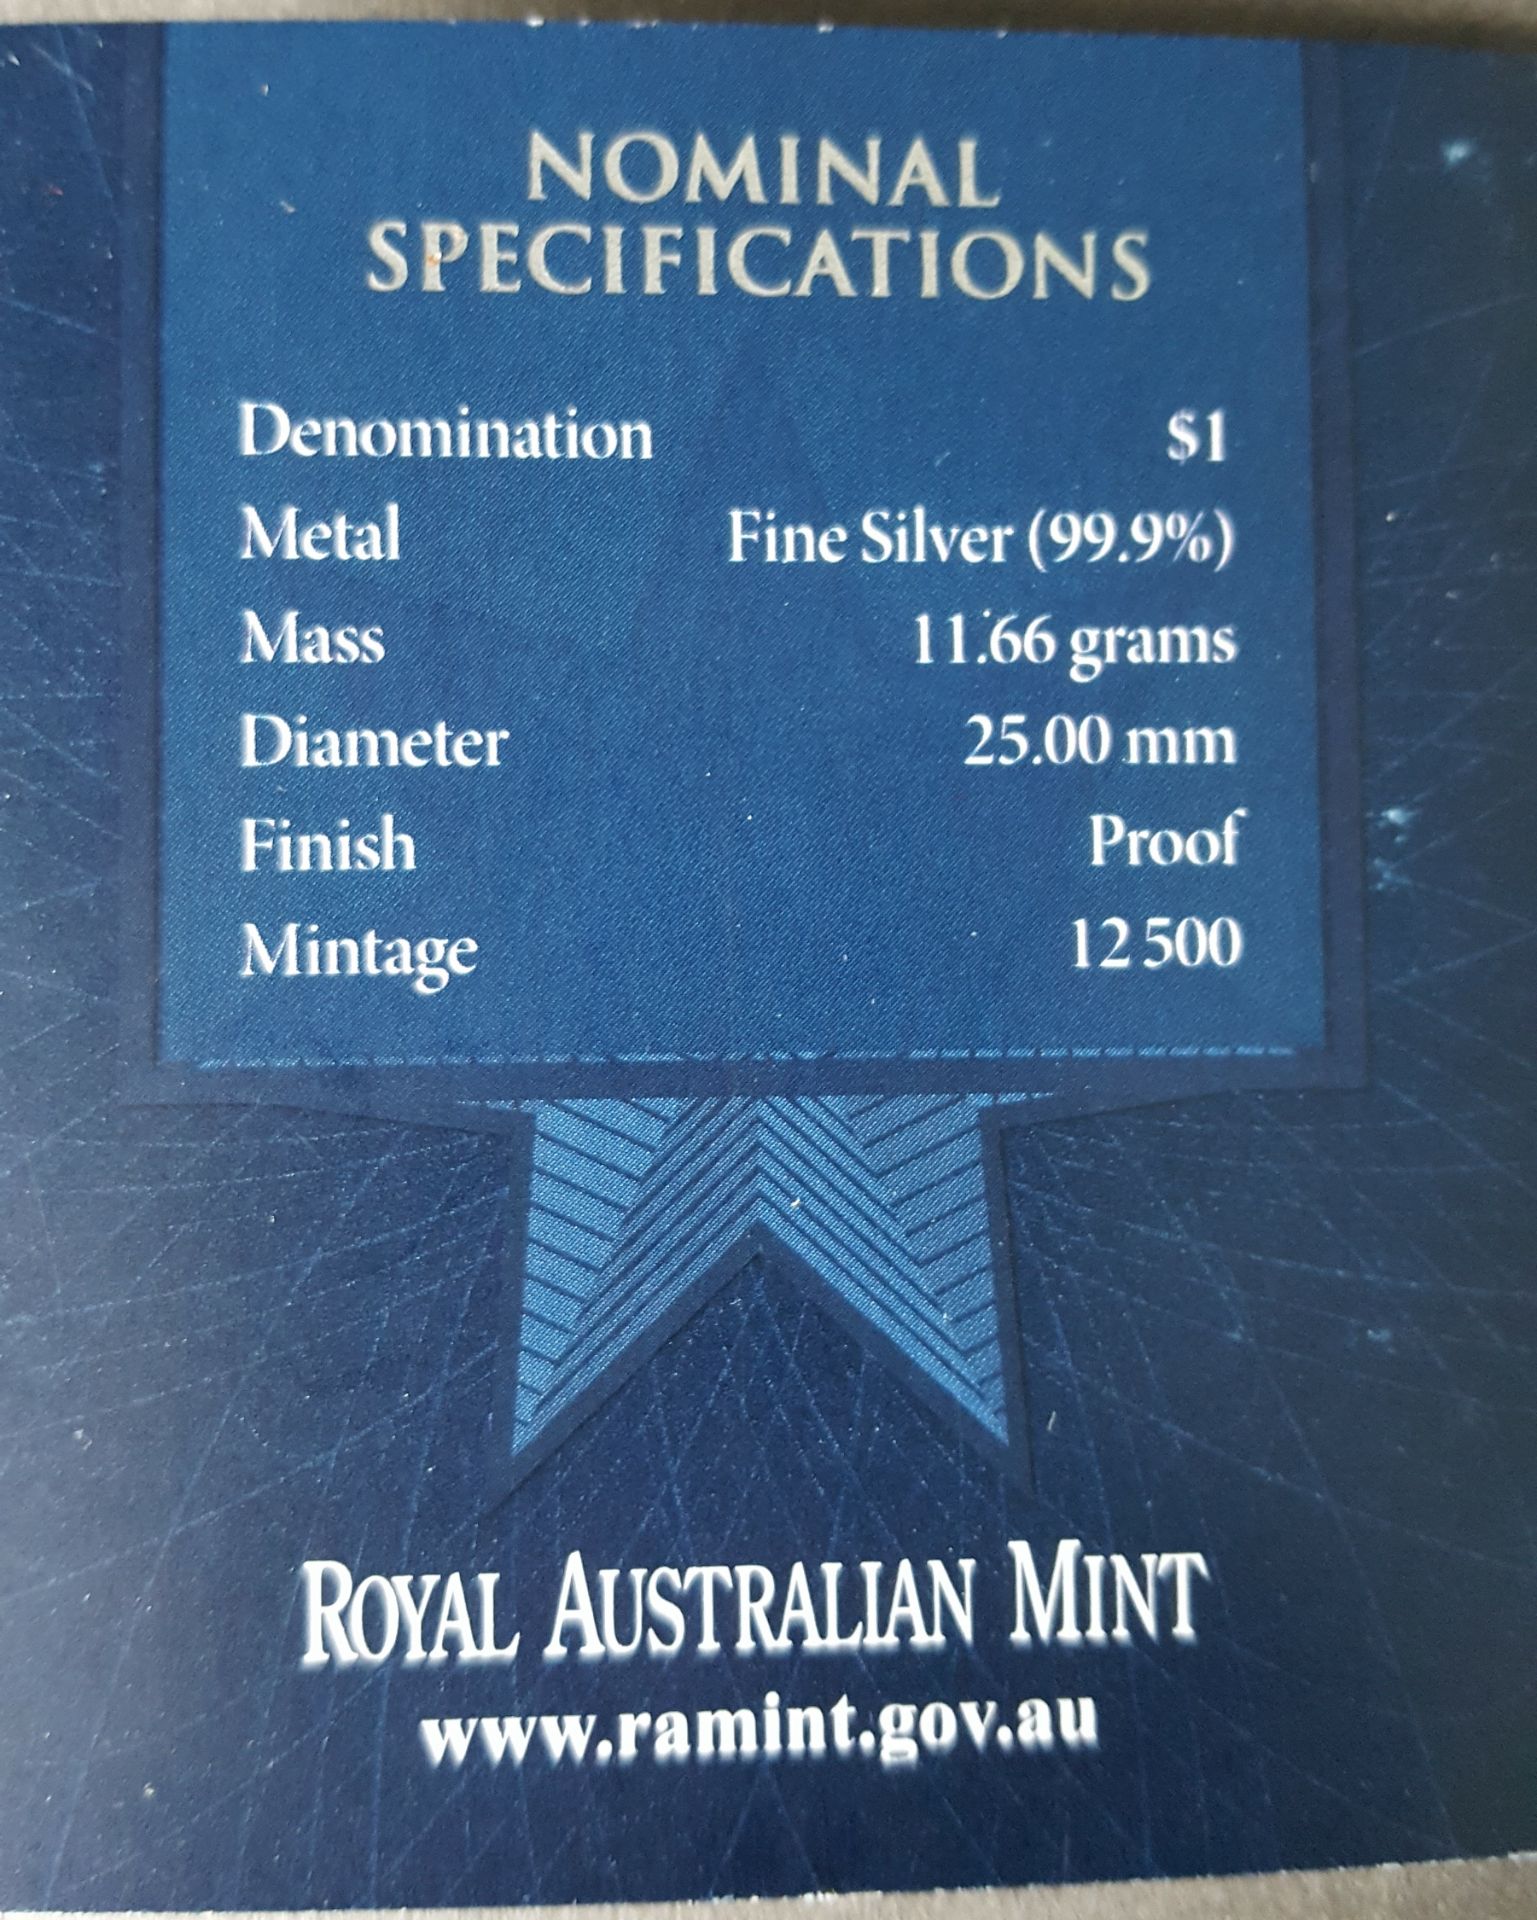 Collectable Proof Coins Silver Royal Australian Mint $1 & Perth Mint $1 Kookaburra - Image 9 of 9